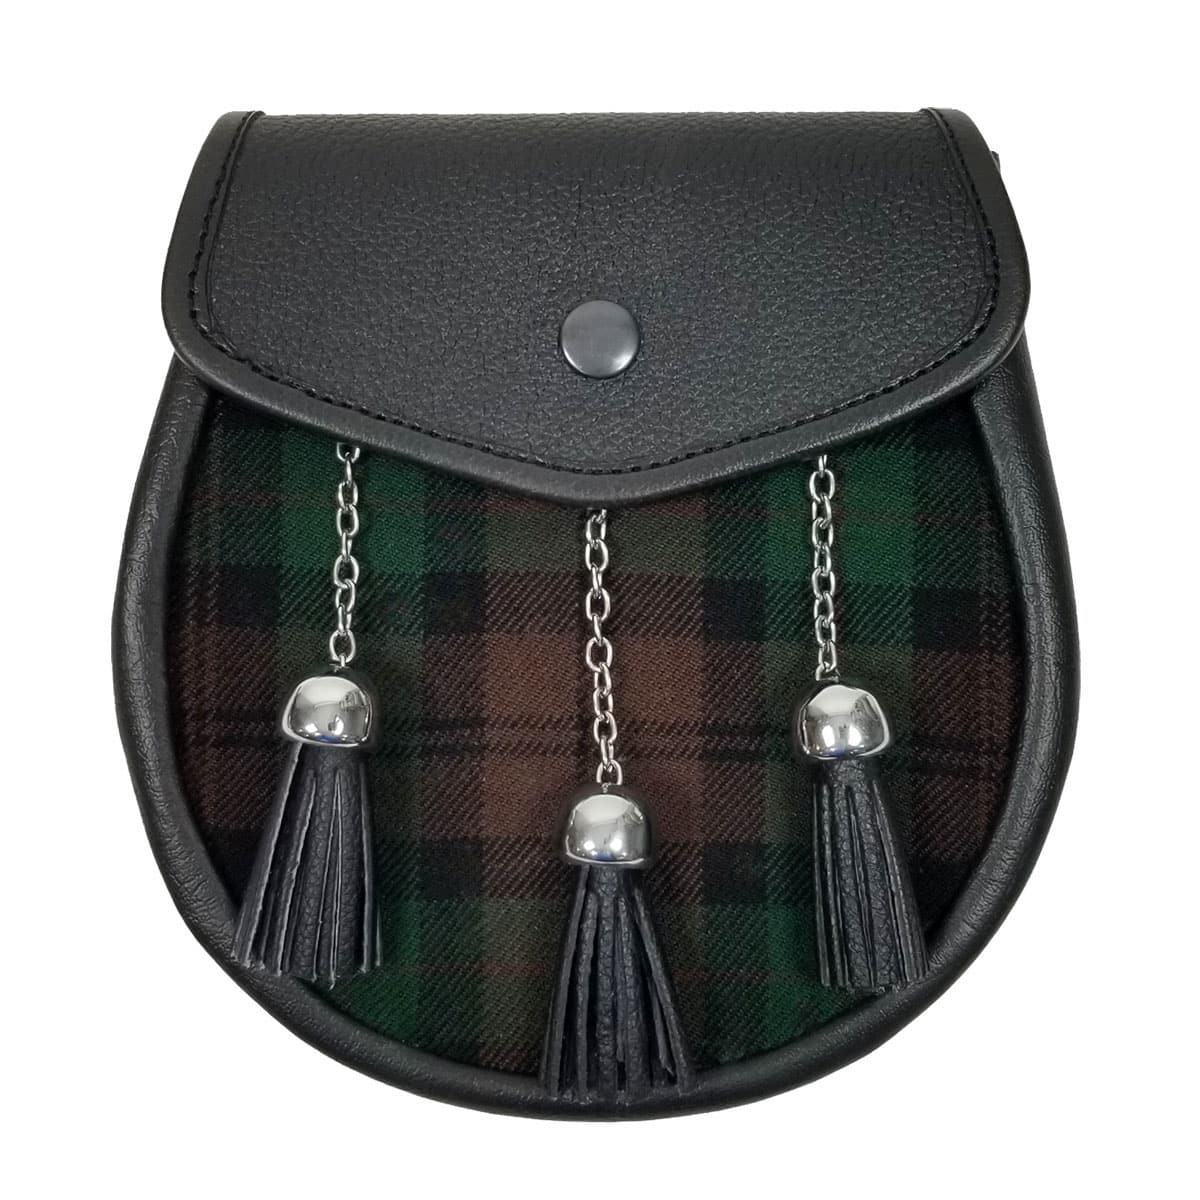 A Tartan and Leather Sporran with a black snap closure flap, featuring a green and brown tartan front panel, and three black tassels hanging from silver chains.